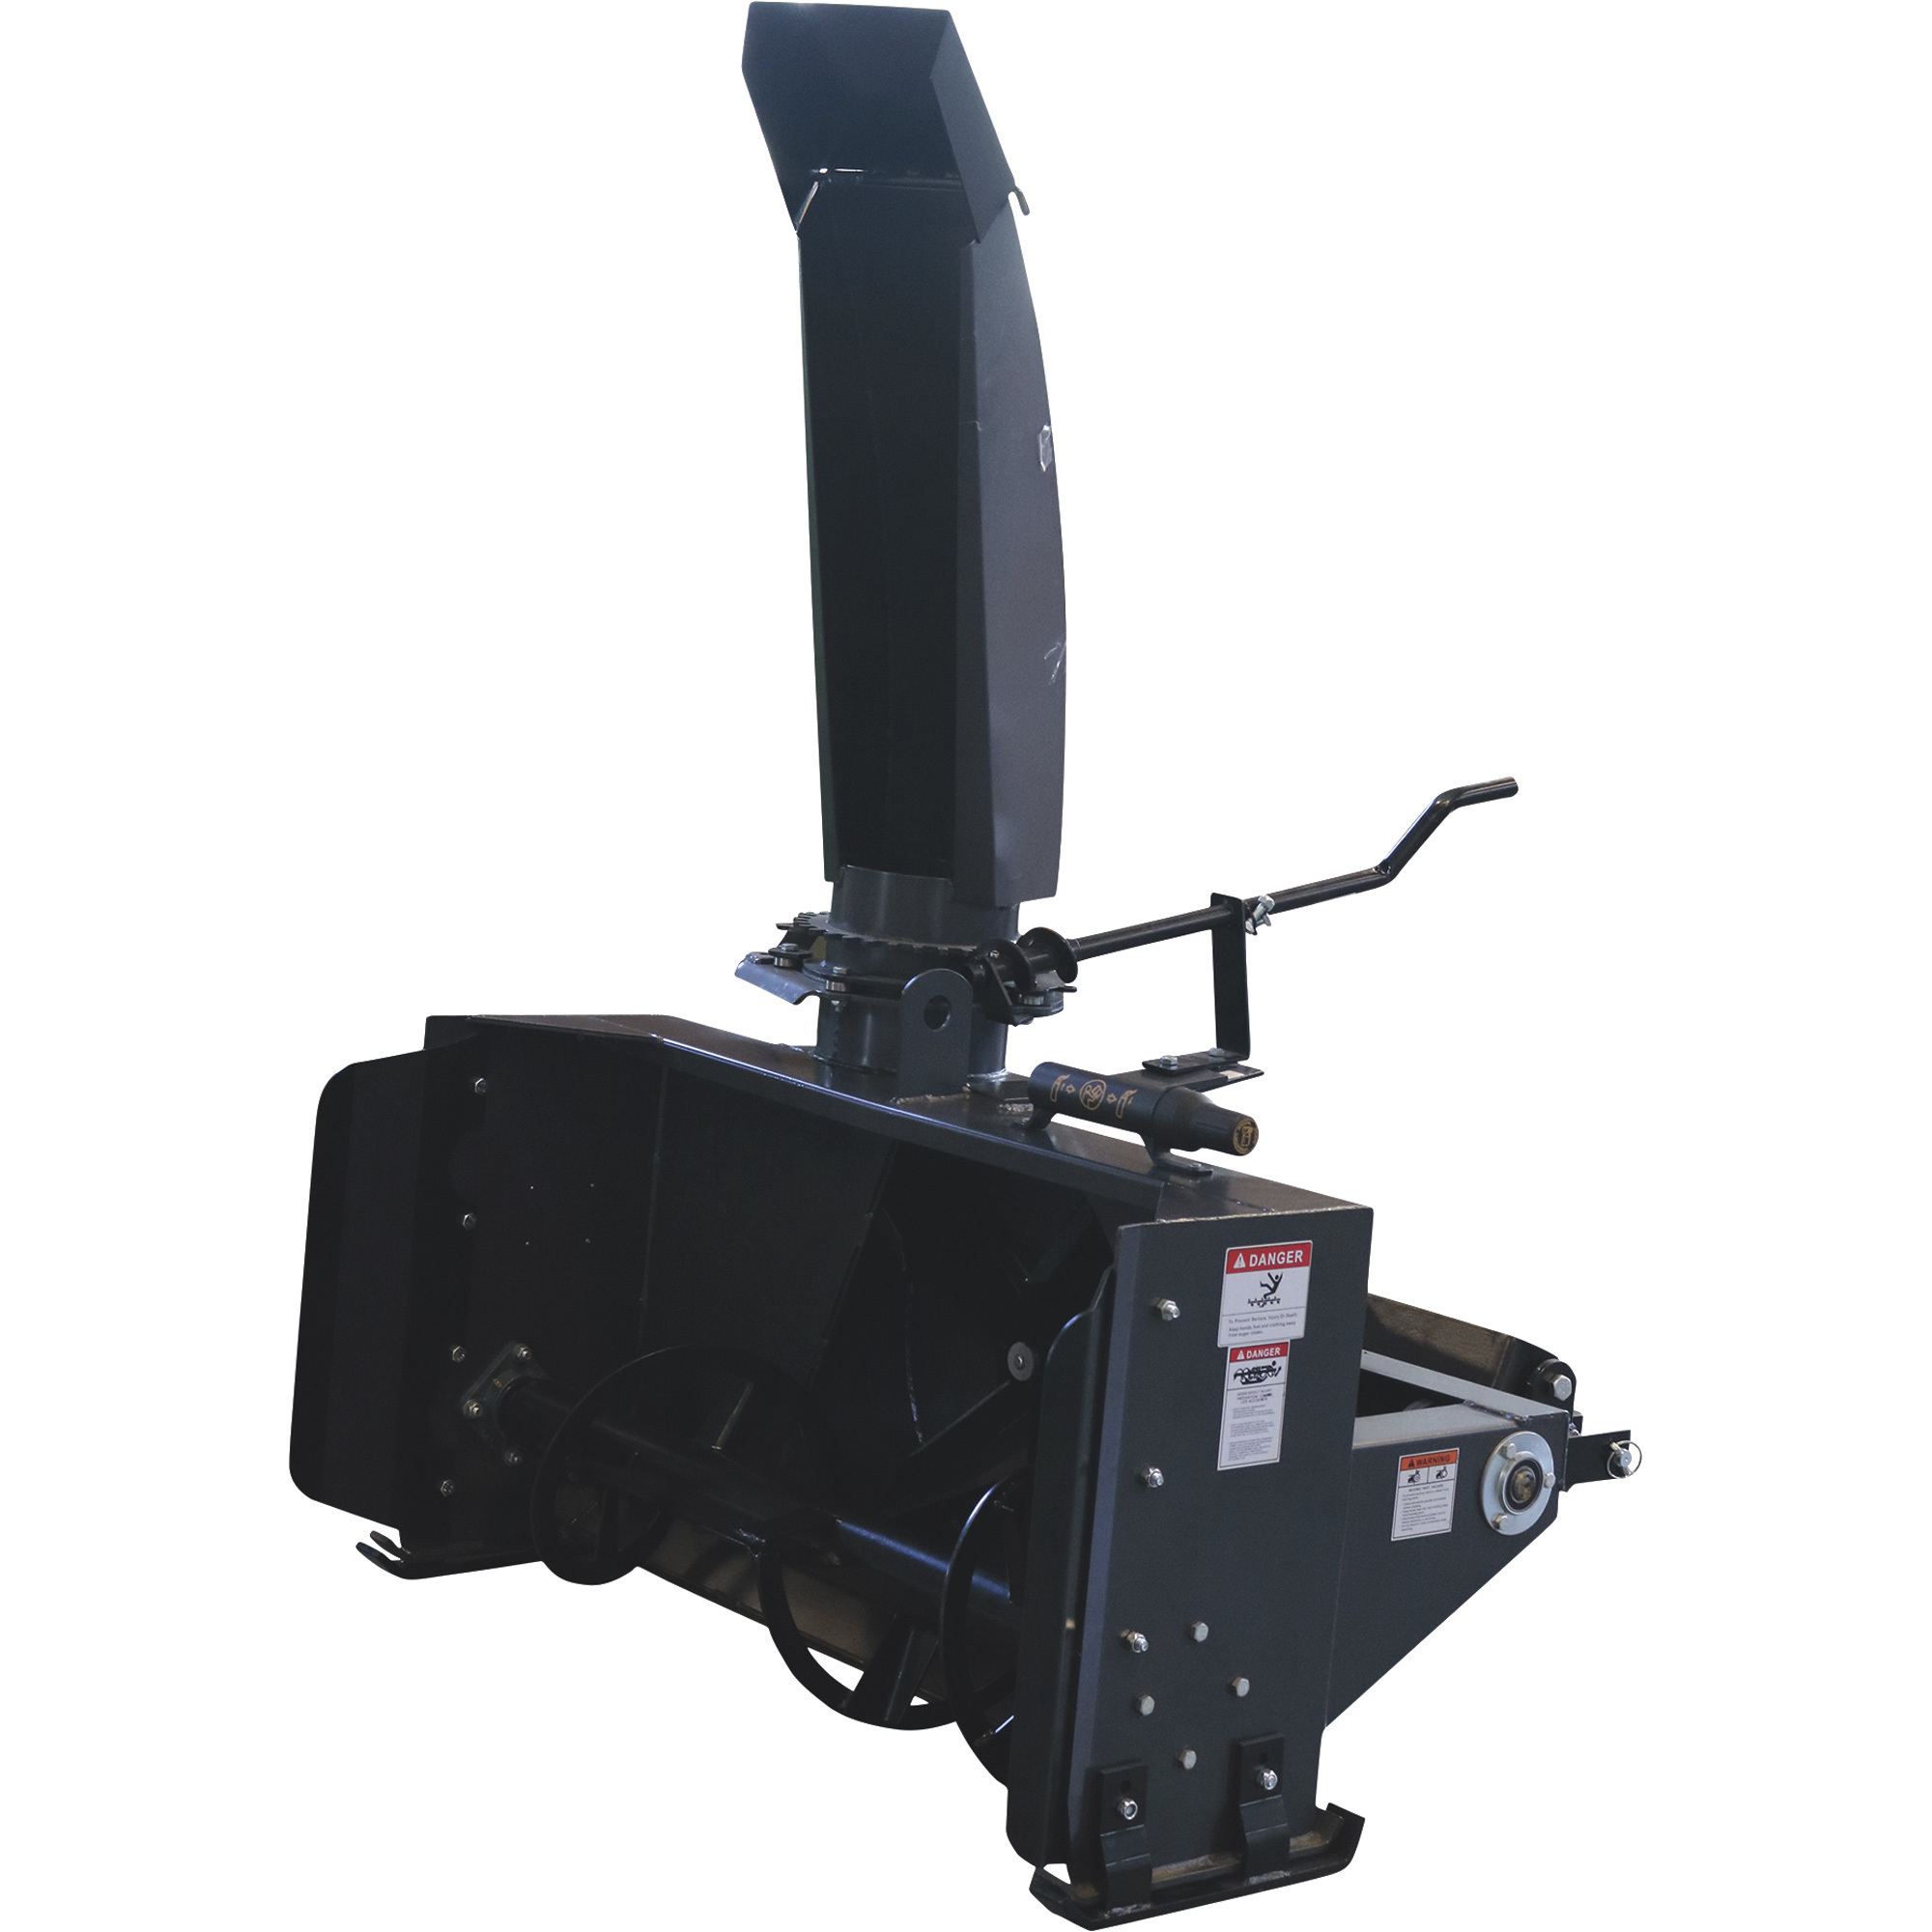 NorTrac 3-Pt. Snow Blower, 76-80Inch W Intake, Fits Tractors 35 HP to 60 HP, Model BE-SBS7680G